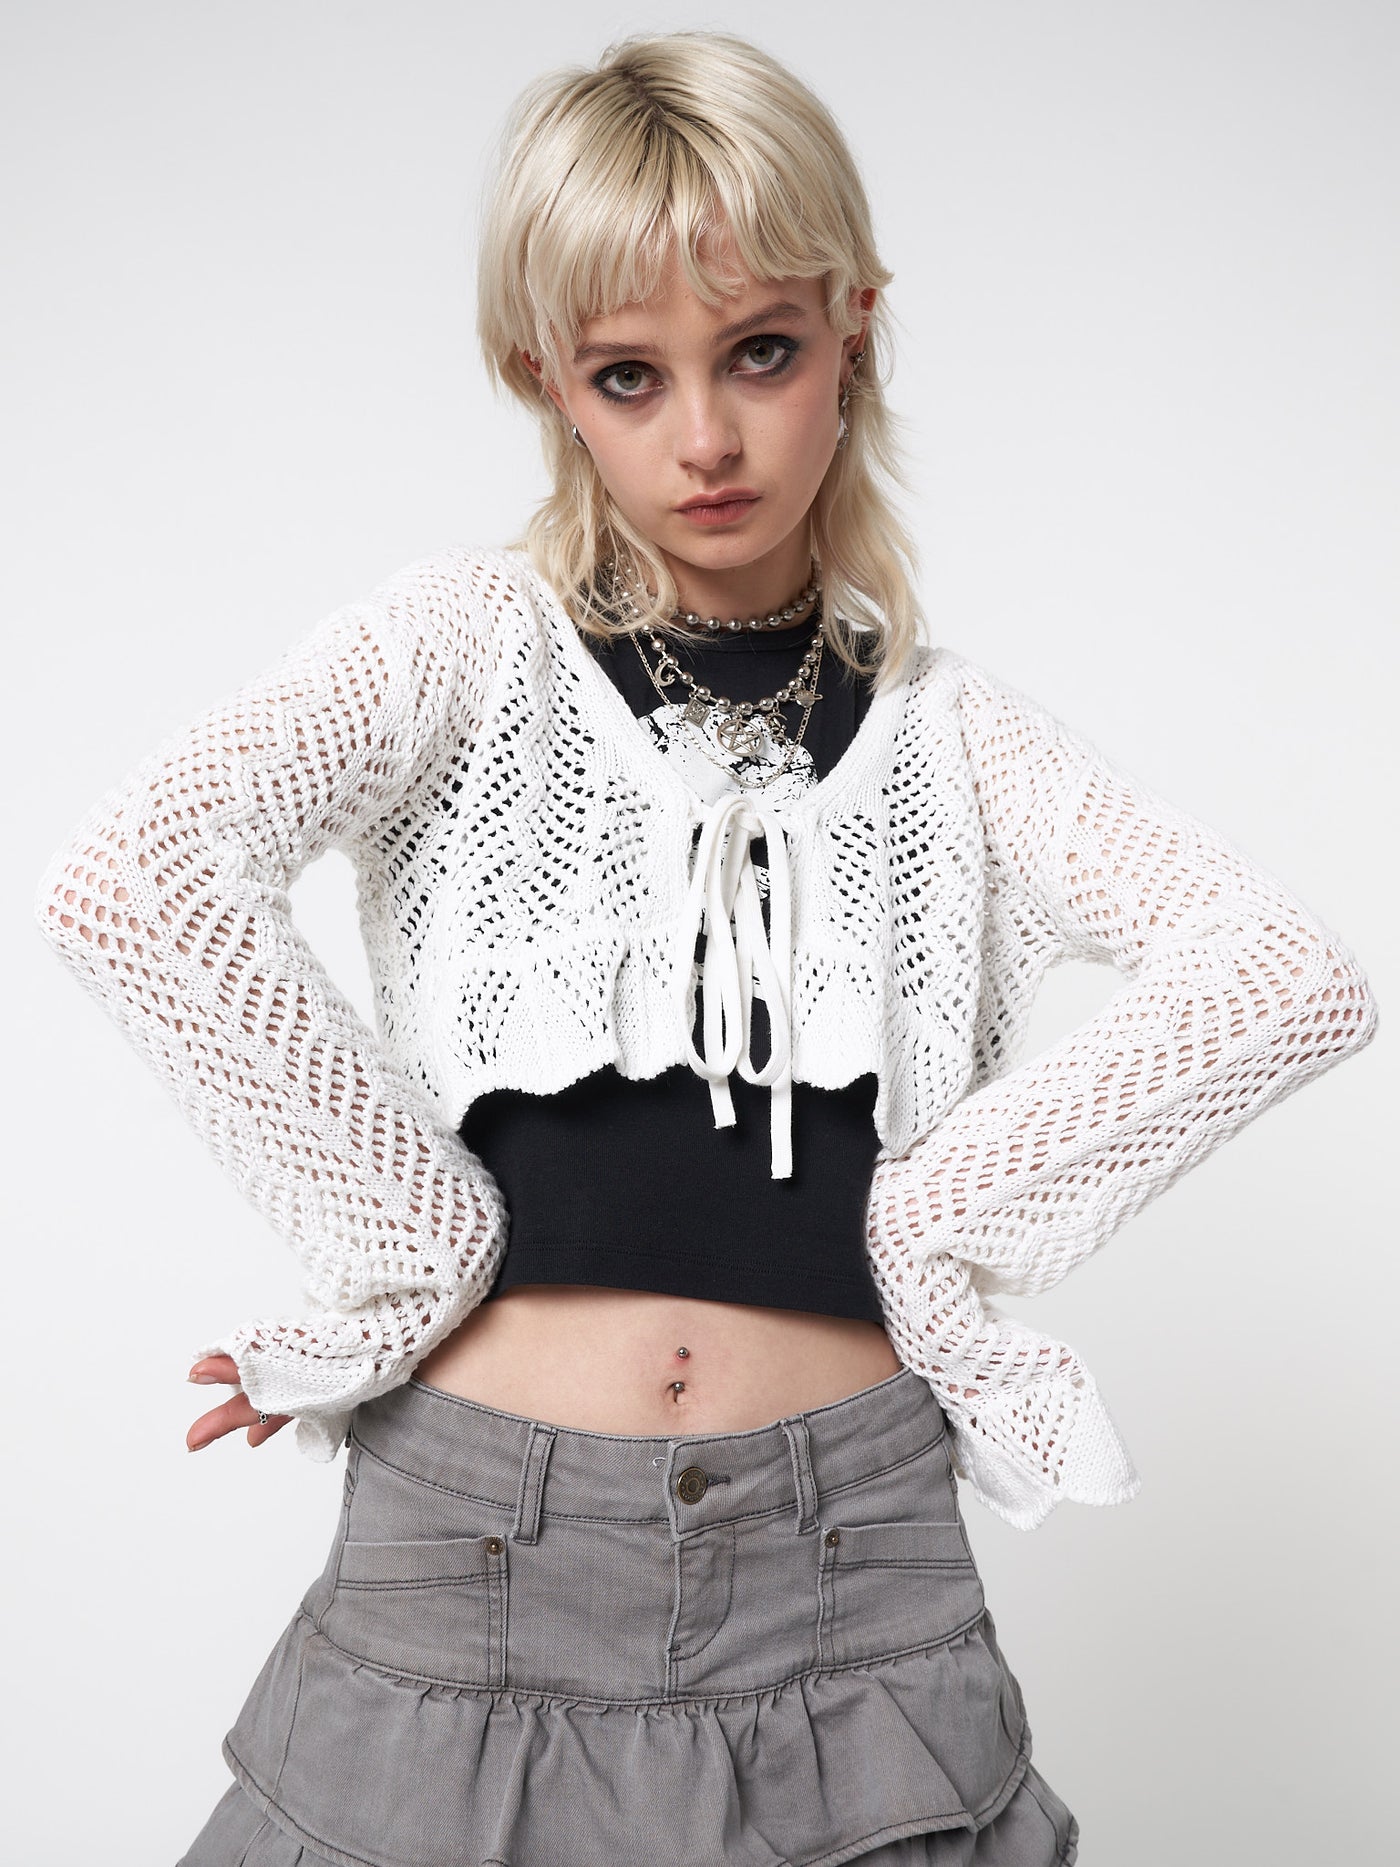 Tie front cardigan in white featuring crochet style knit pattern